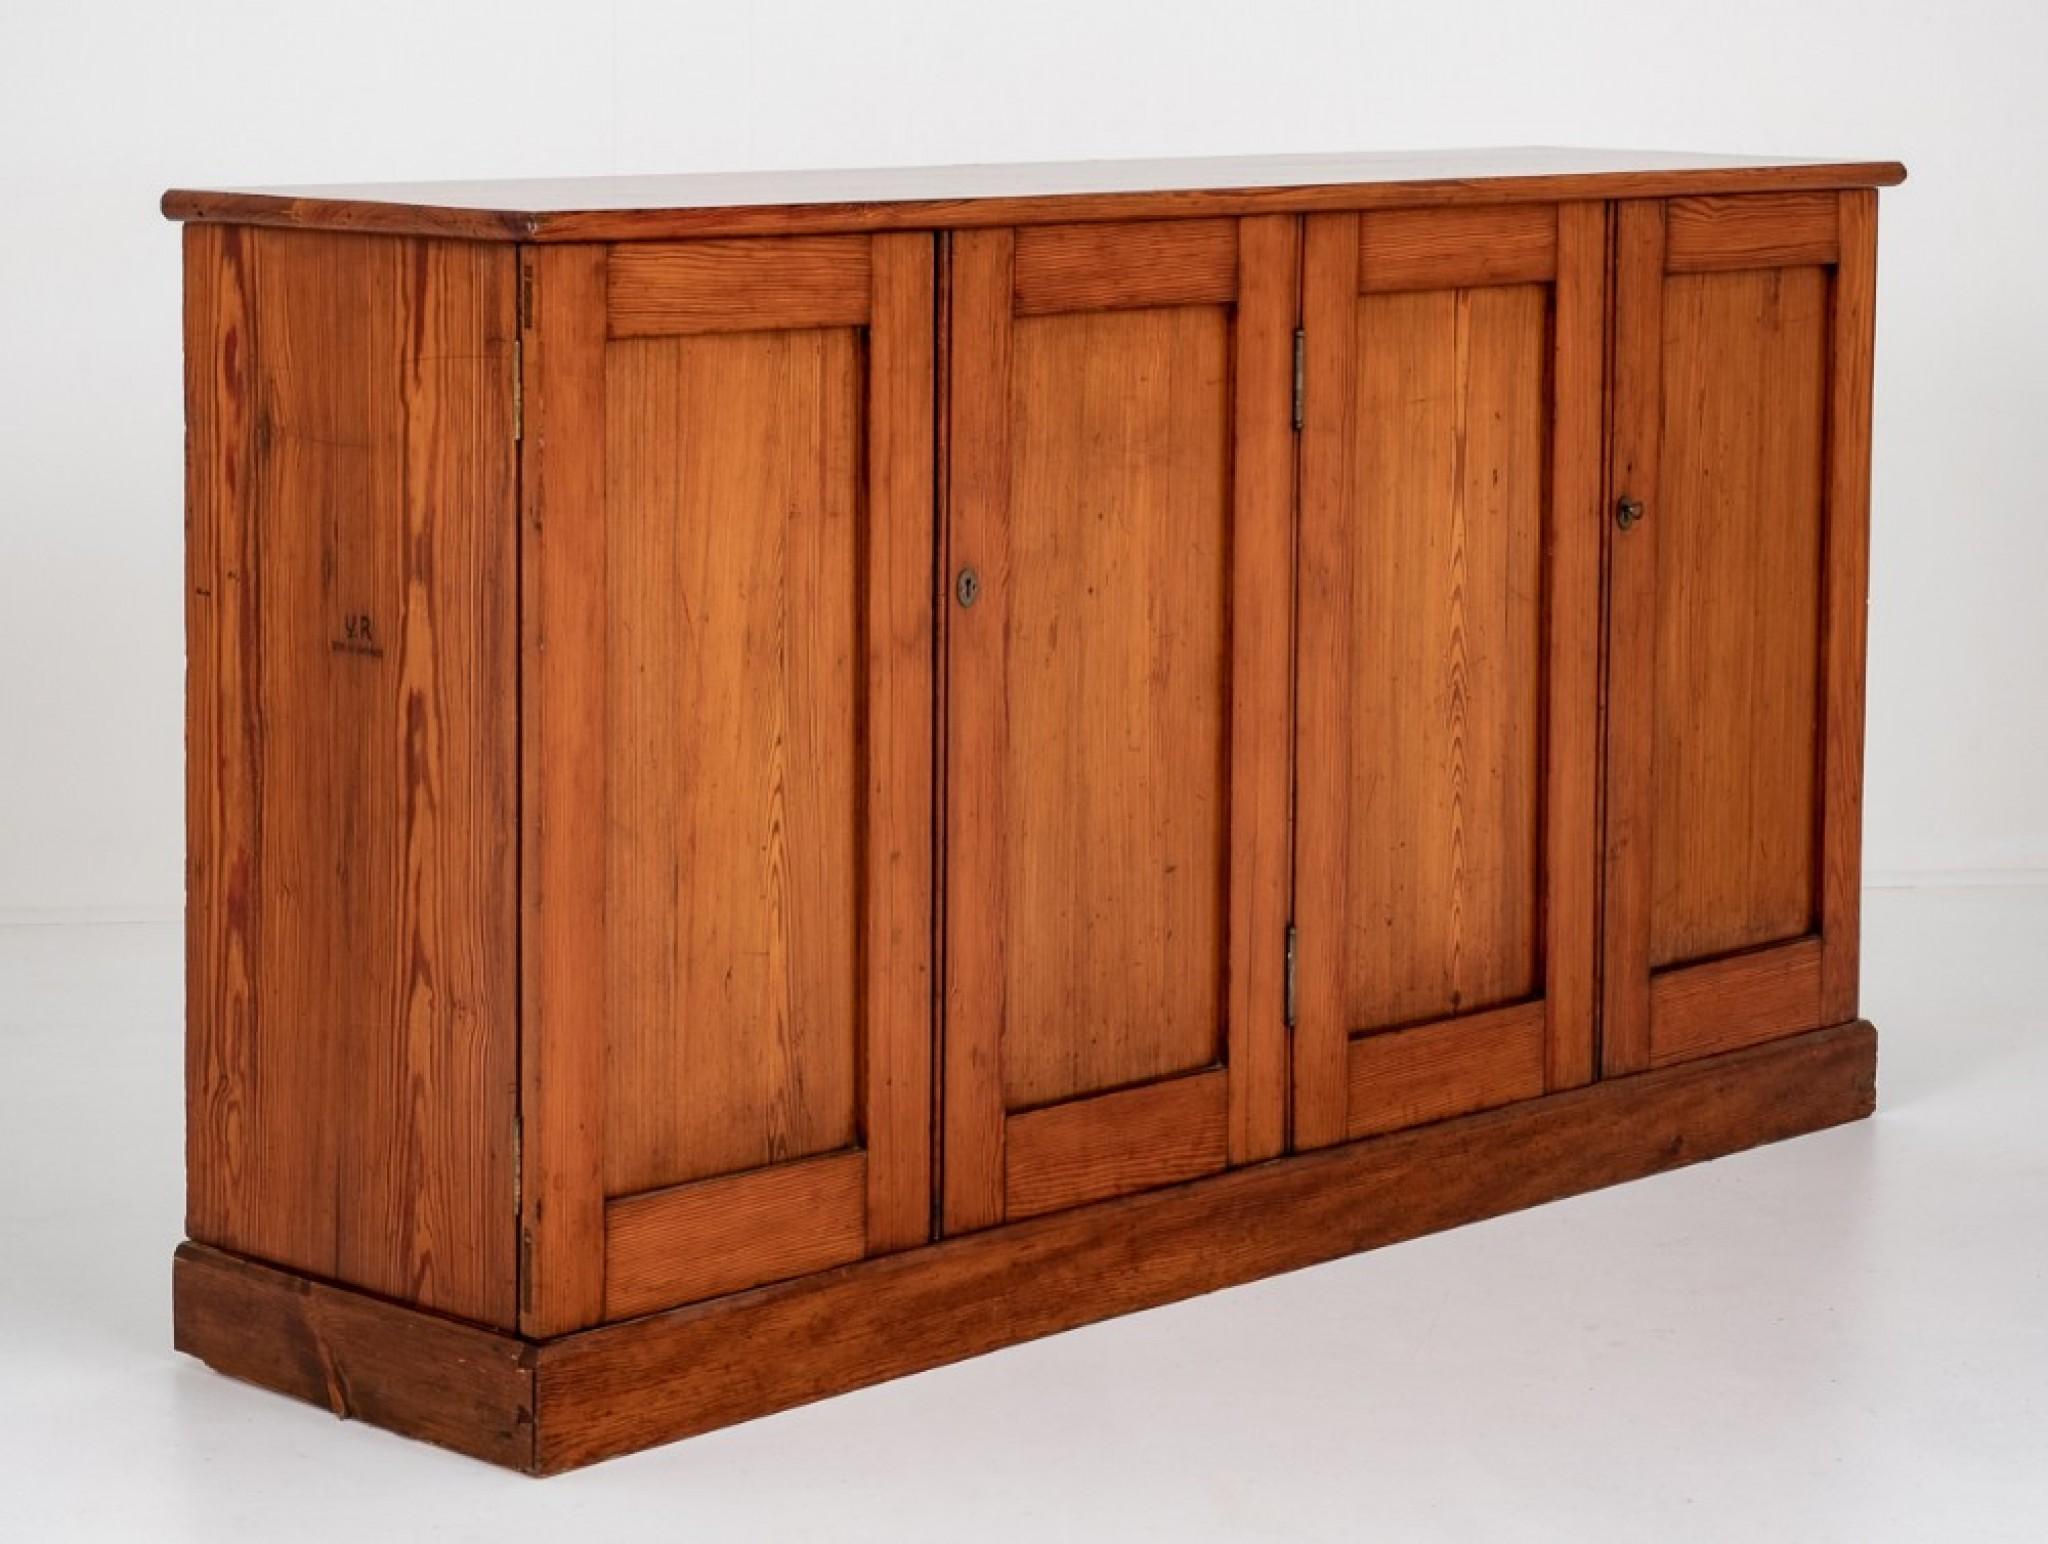 Antique Pitch Pine Cabinet.
This Cabinet is raised Upon a Plinth Base with 4 Doors.
The Doors Open To reveal A shelved Interior, great storage solution.
Circa 1880
The Cabinet Features a Makers Stamp 